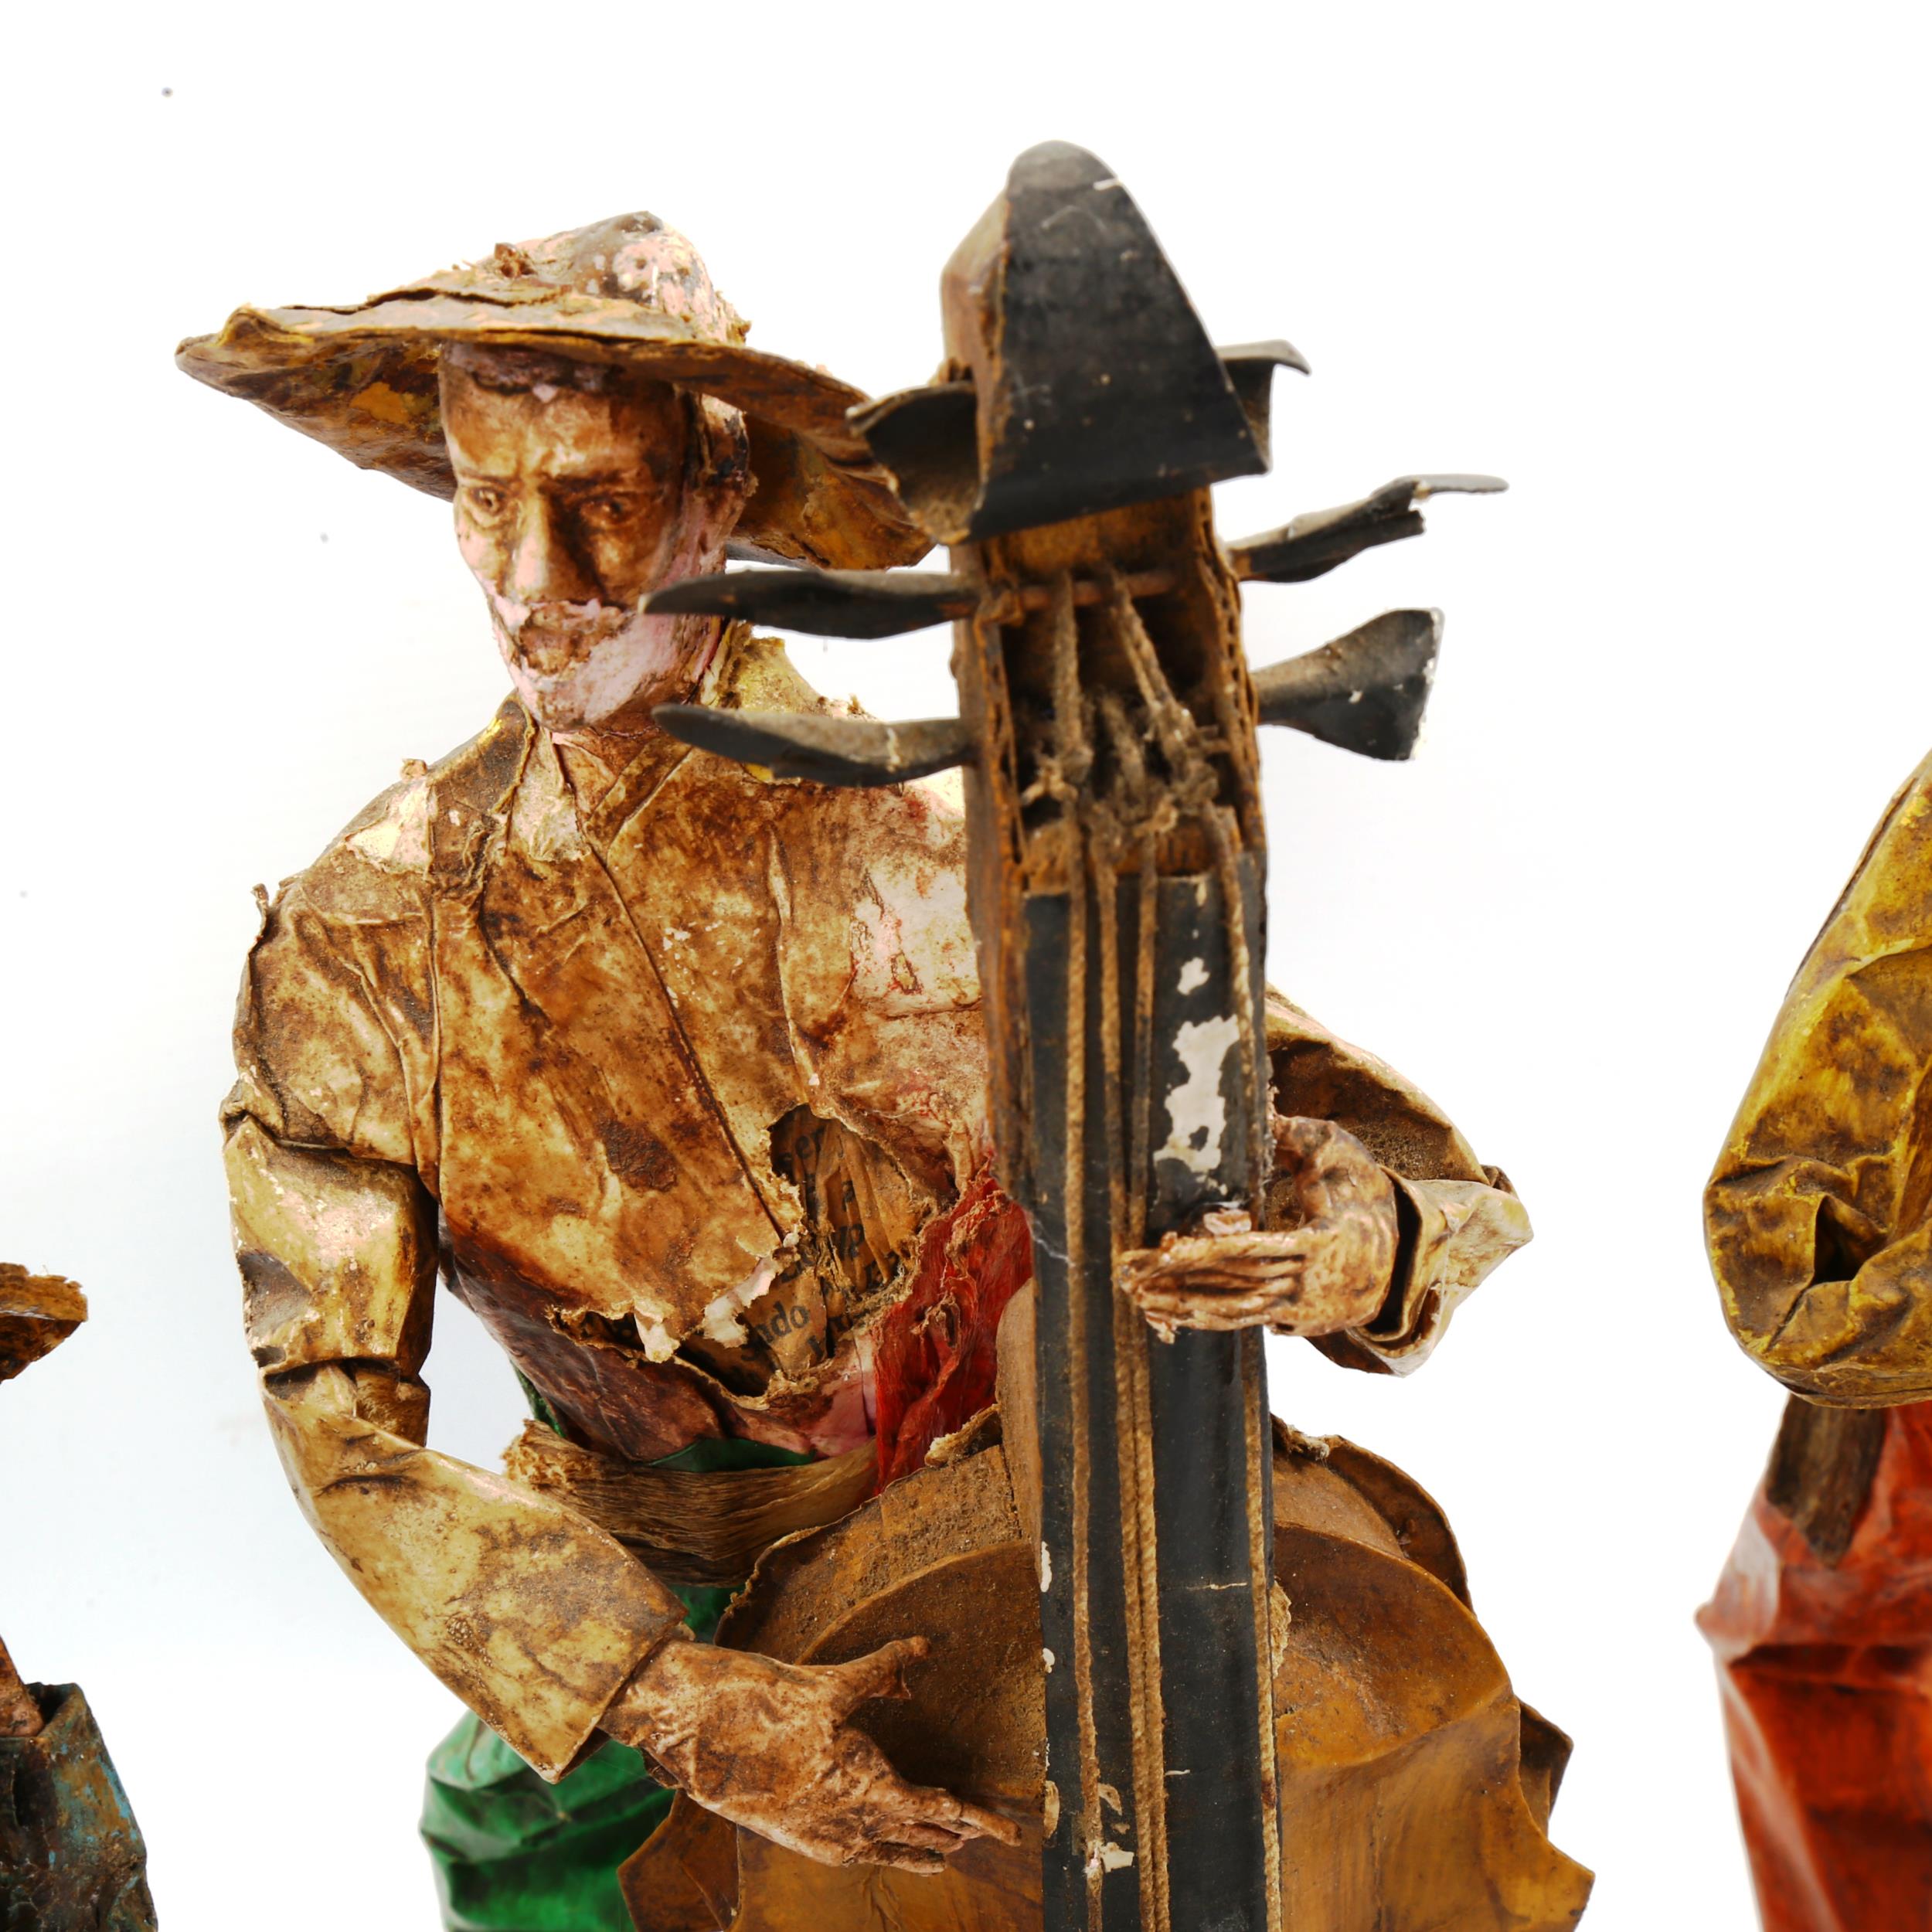 A Mexican papier mache set of 3 musicians, tallest 34cm, purchased in Mexico in 1951 - Image 2 of 3